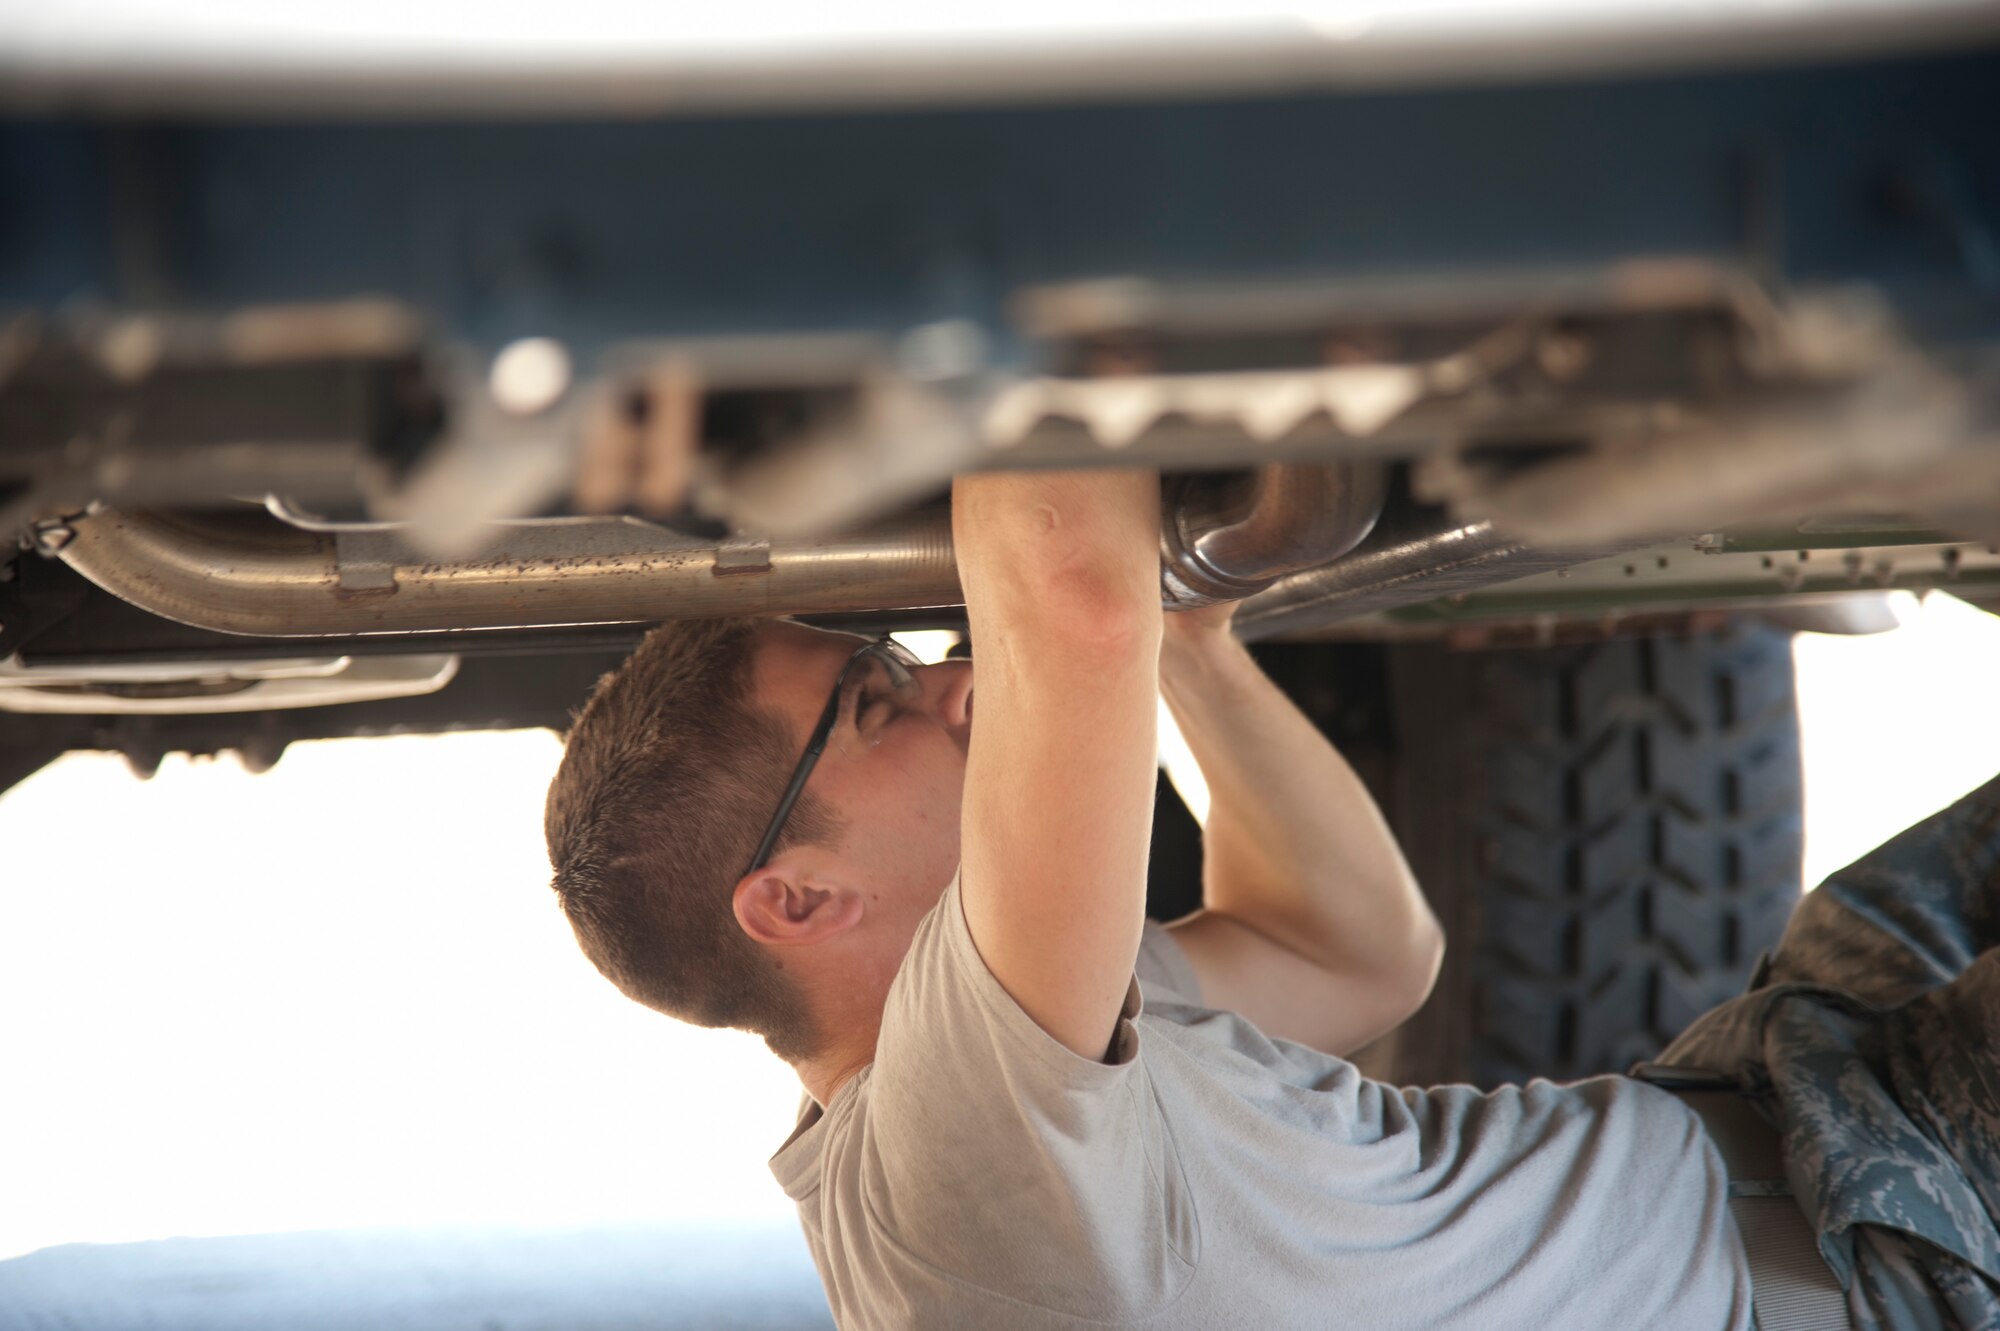 Airman Cody Kirkum, Vehicle and Vehicular Maintenance Apprentice, is troubleshooting a malfunction on a Humvee at the 344th Training Squadron Det. 1, Vehicle Management Schoolhouse in Port Hueneme, Calif. This detachment educates over 1,500 students. Though many arrive directly from Air Force Basic Training, they can also be civilians, international students and members of other military services.  This world-class training includes basic and advanced fire truck, material handling equipment, vehicle & equipment maintenance, and vehicle management & analysis courses. (U.S. Air Force Photo/Tech. Sgt. Thomas Kessler)